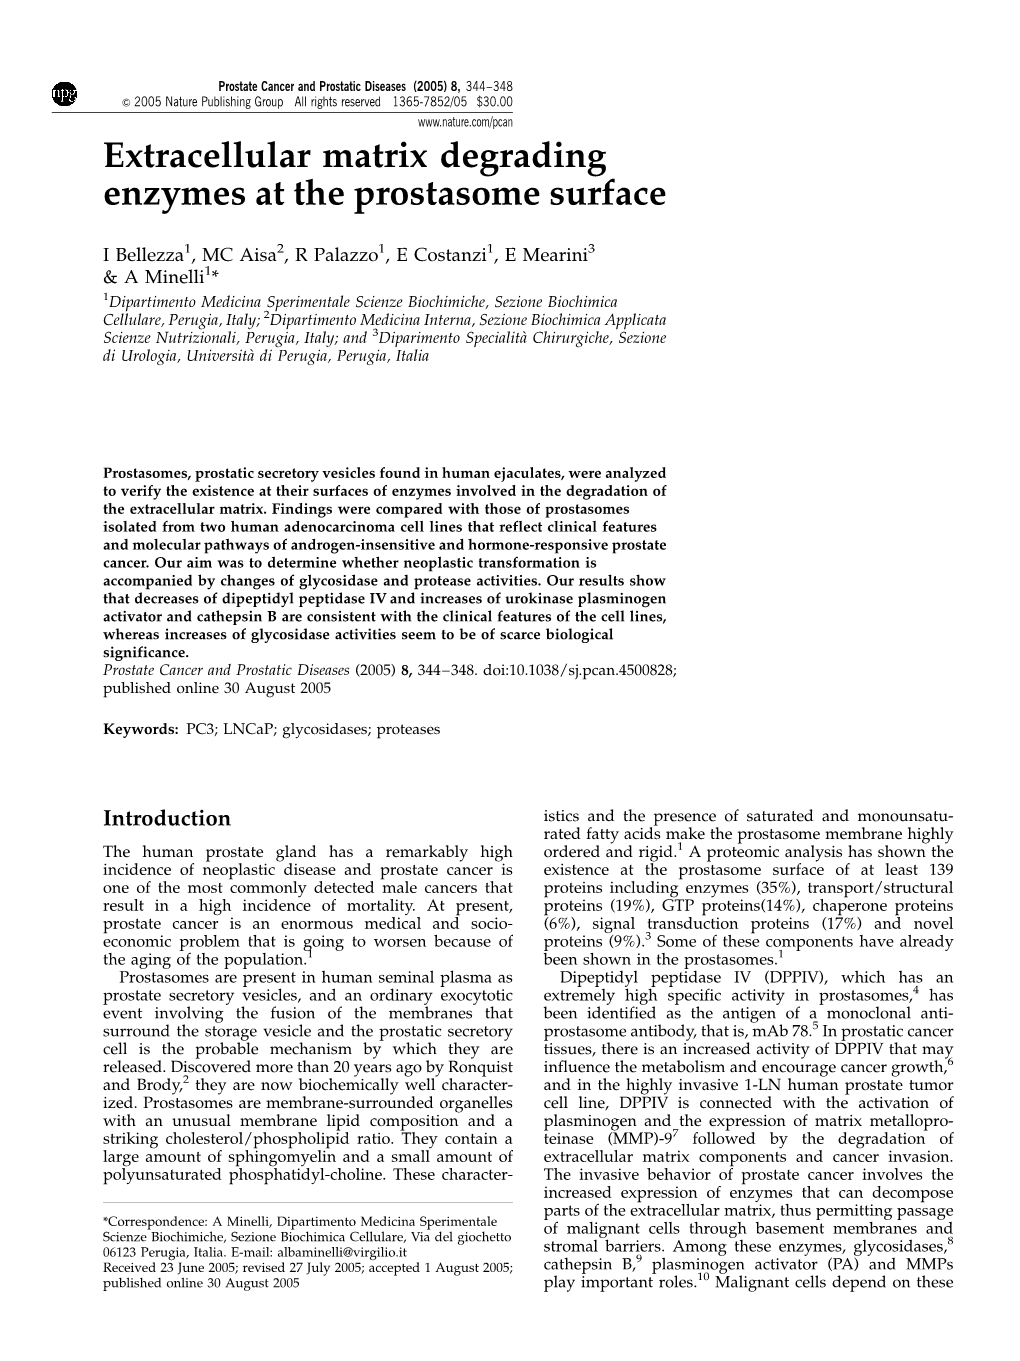 Extracellular Matrix Degrading Enzymes at the Prostasome Surface